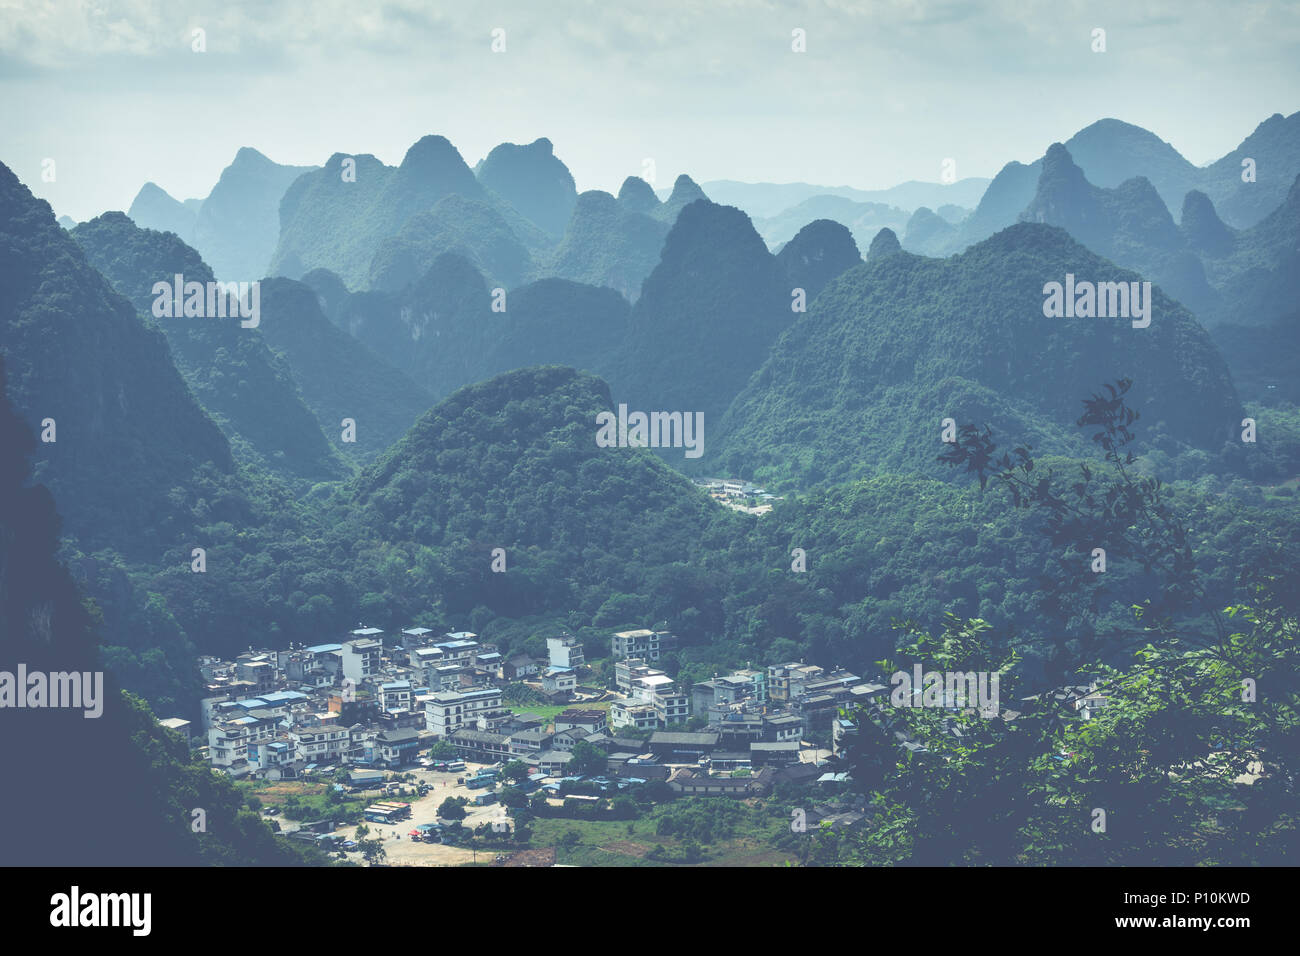 Landscape of Guilin, Karst mountains. Located near Yangshuo, Guilin, Guangxi, China. Stock Photo